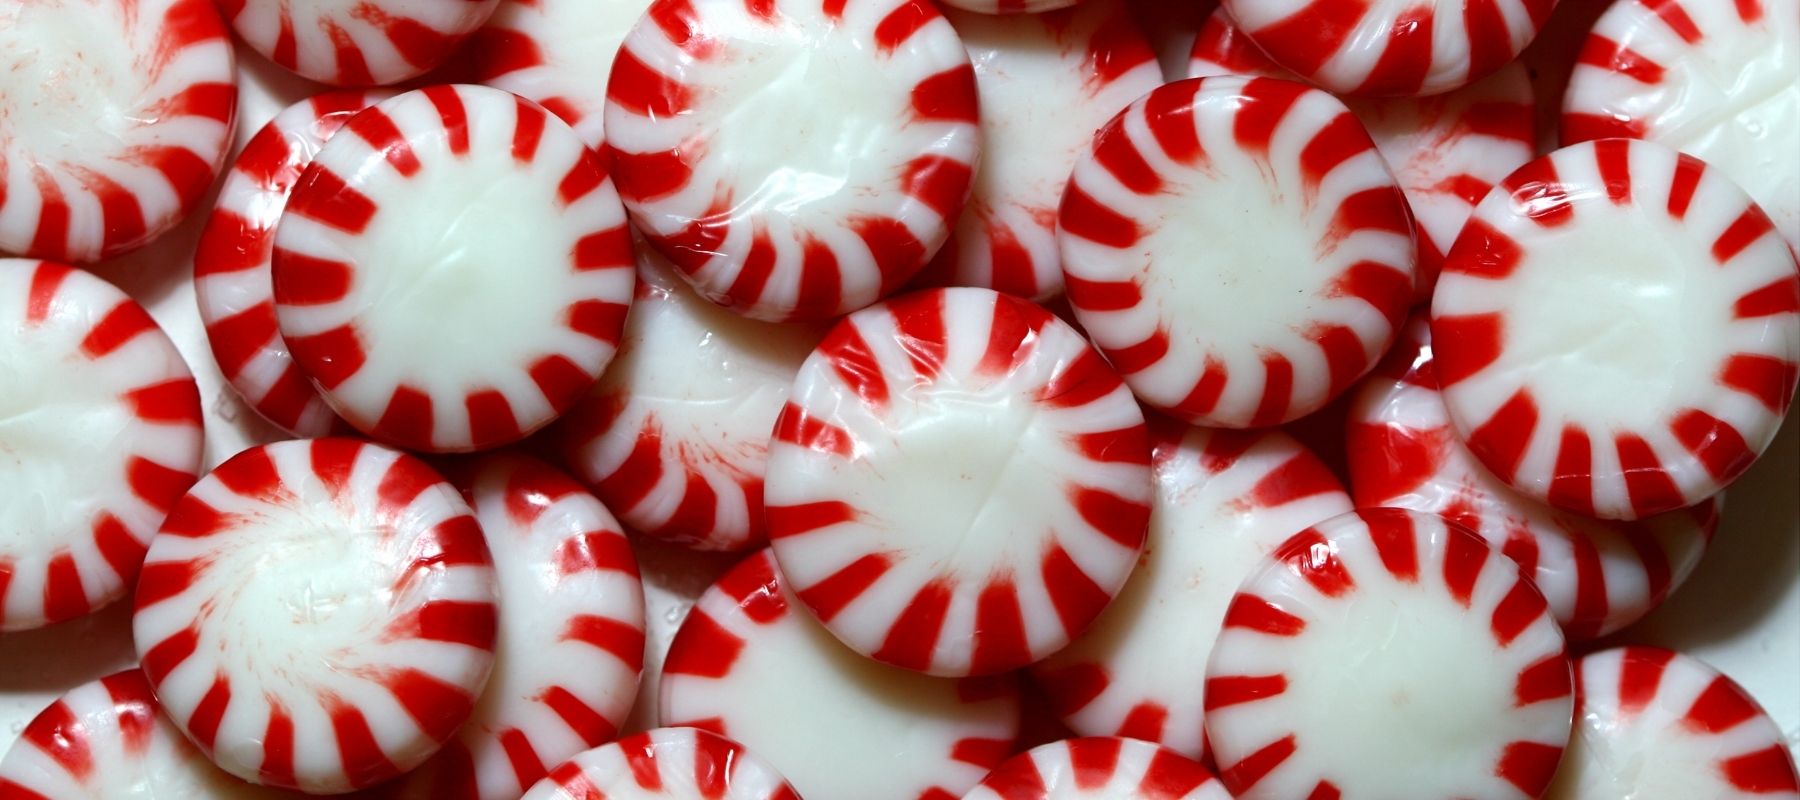 Circular red mints in a pile